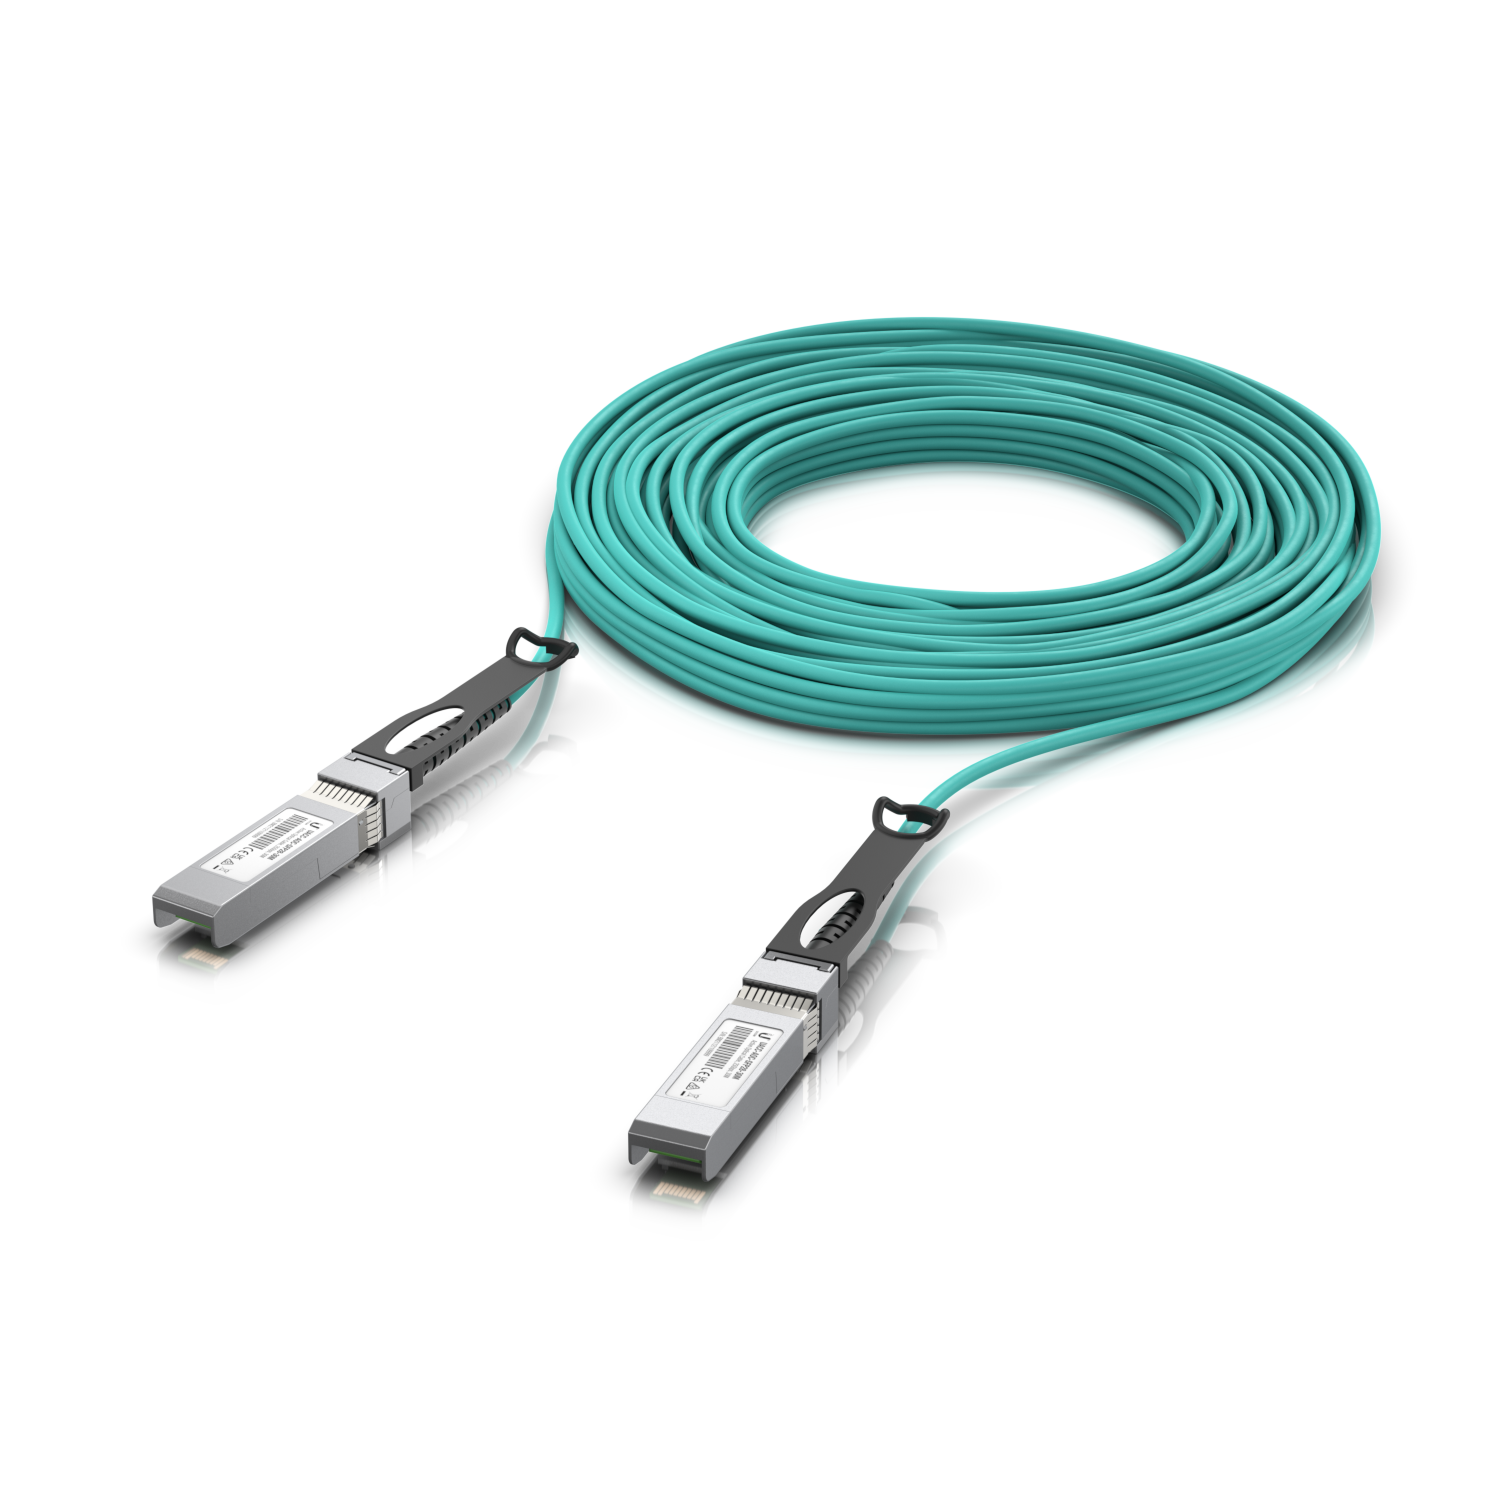 Ubiquiti 25 Gbps Long-Range Direct Attach Cable